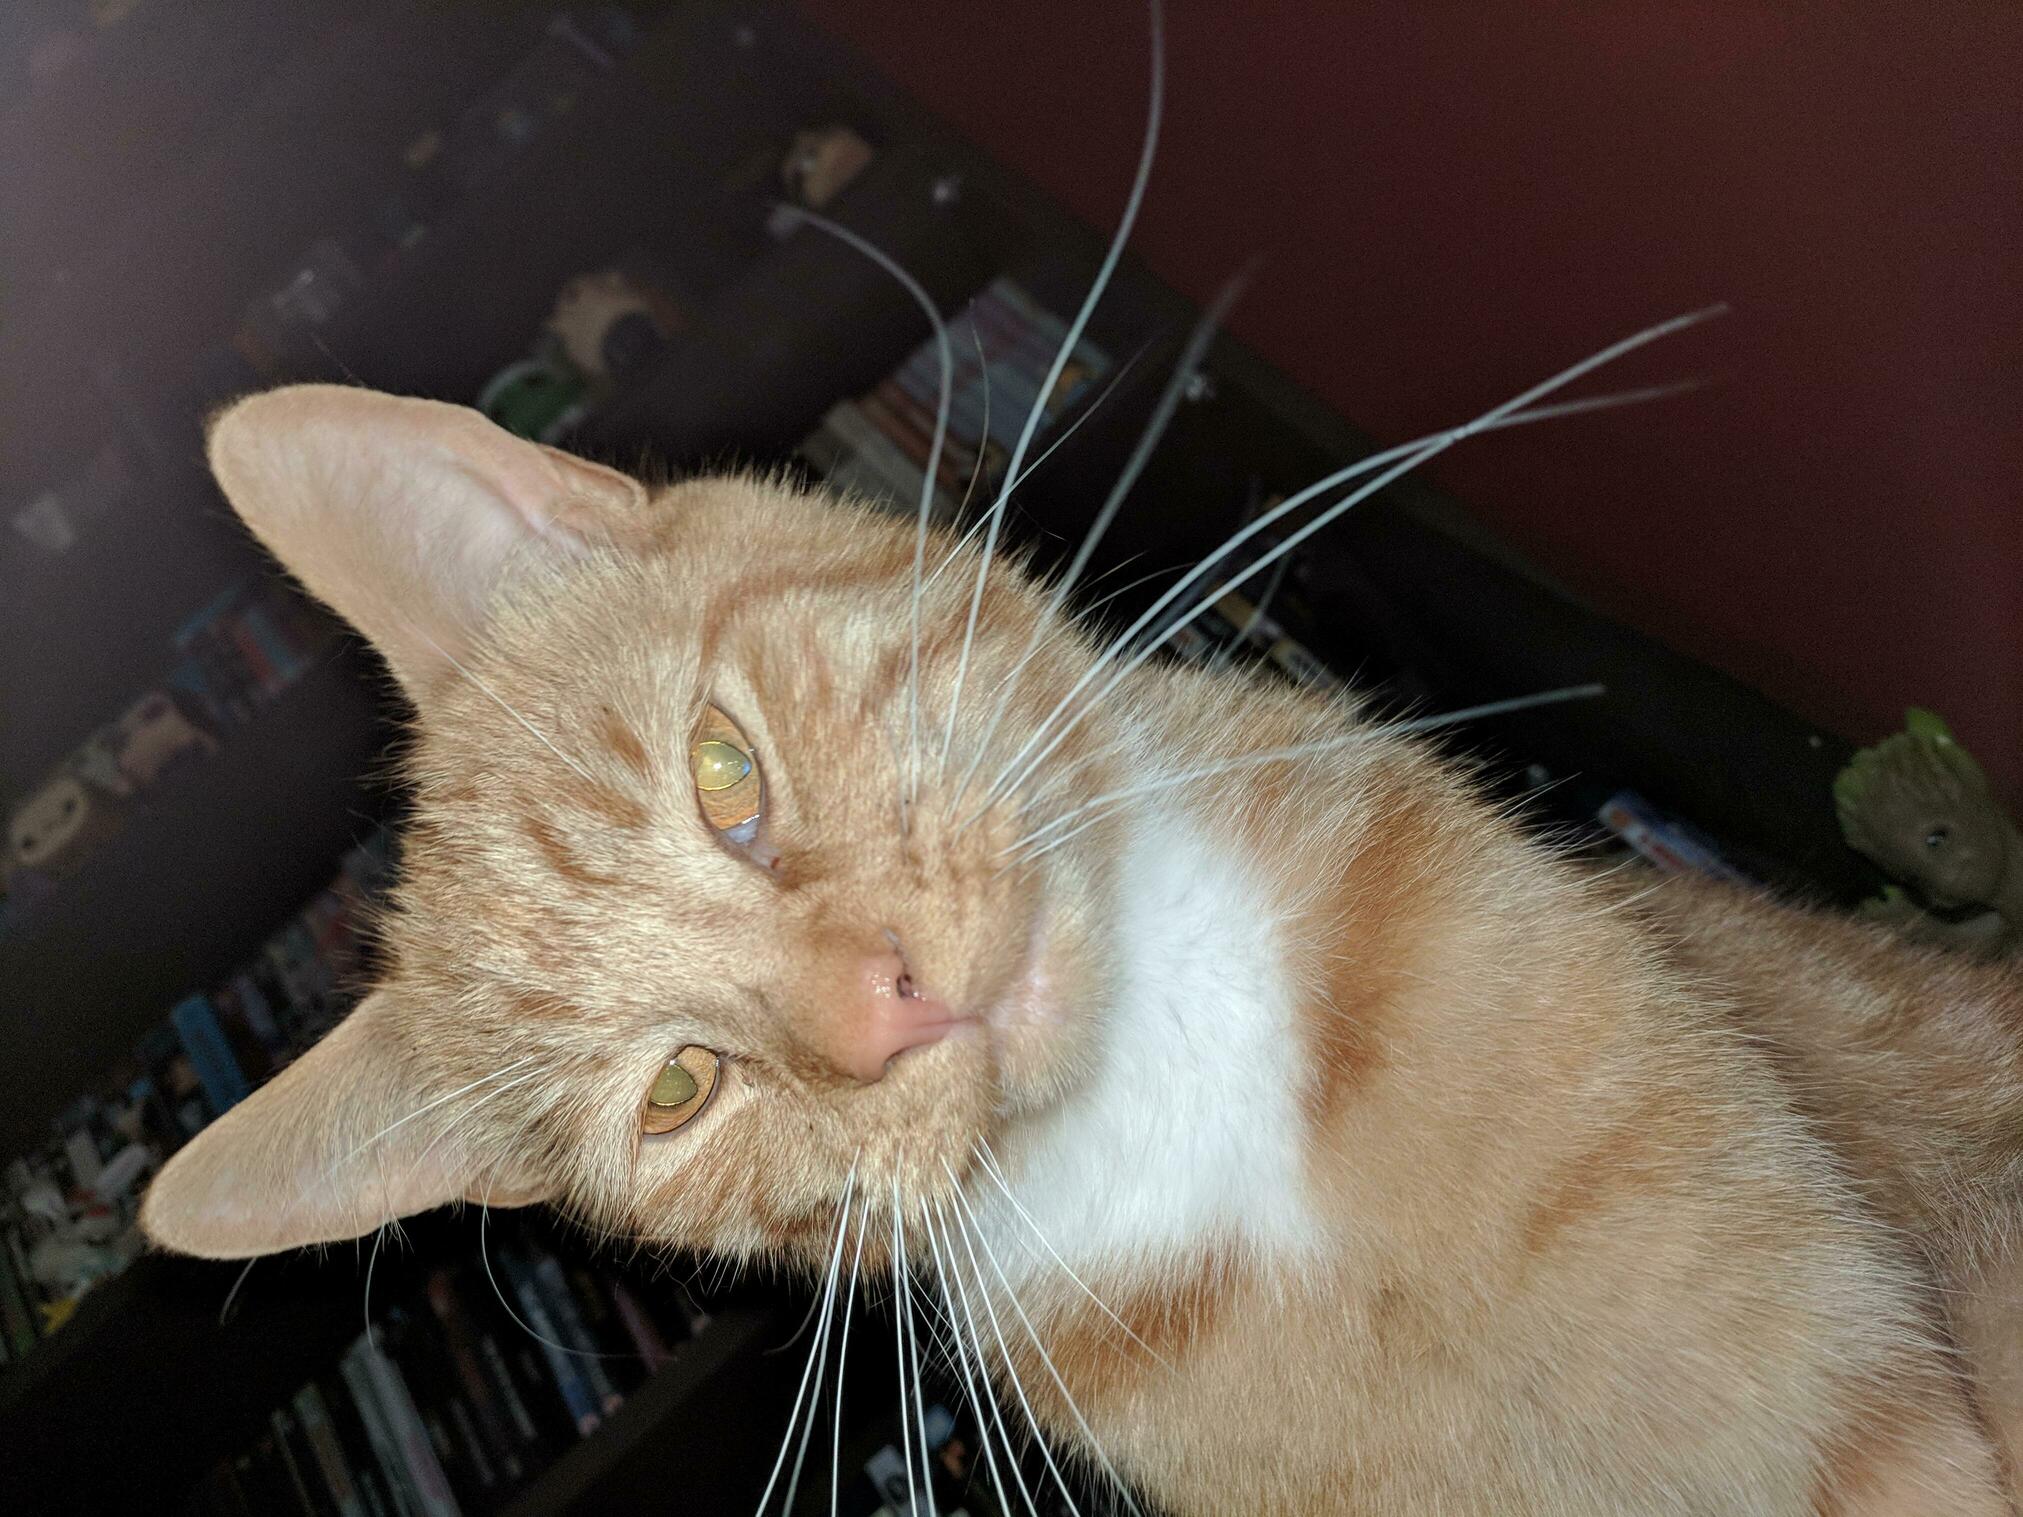 Wake up to this purring on my nightstand every morning.